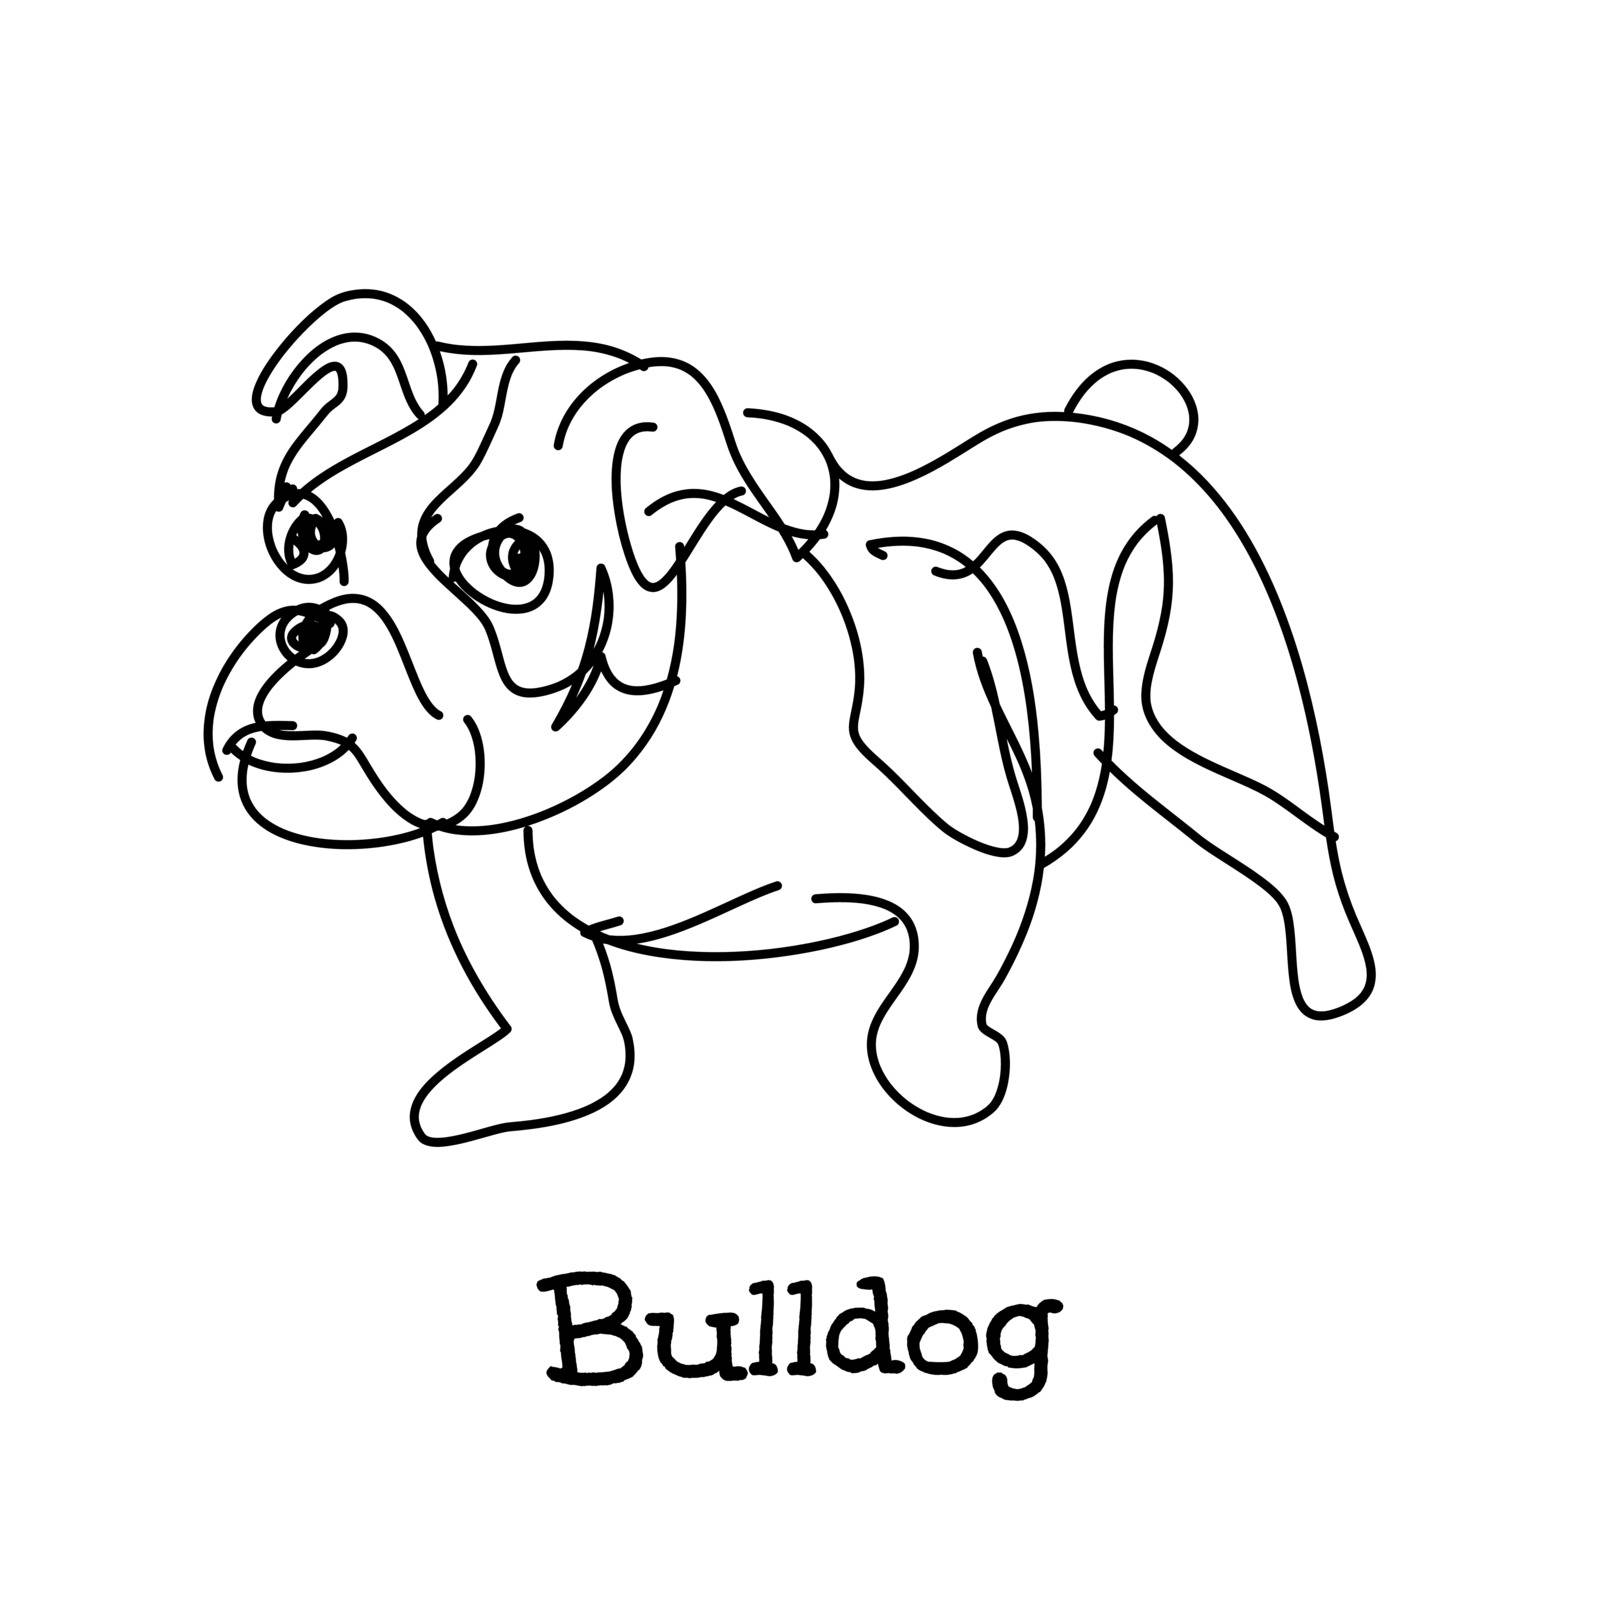 Doodle drawing of young bulldog on white background